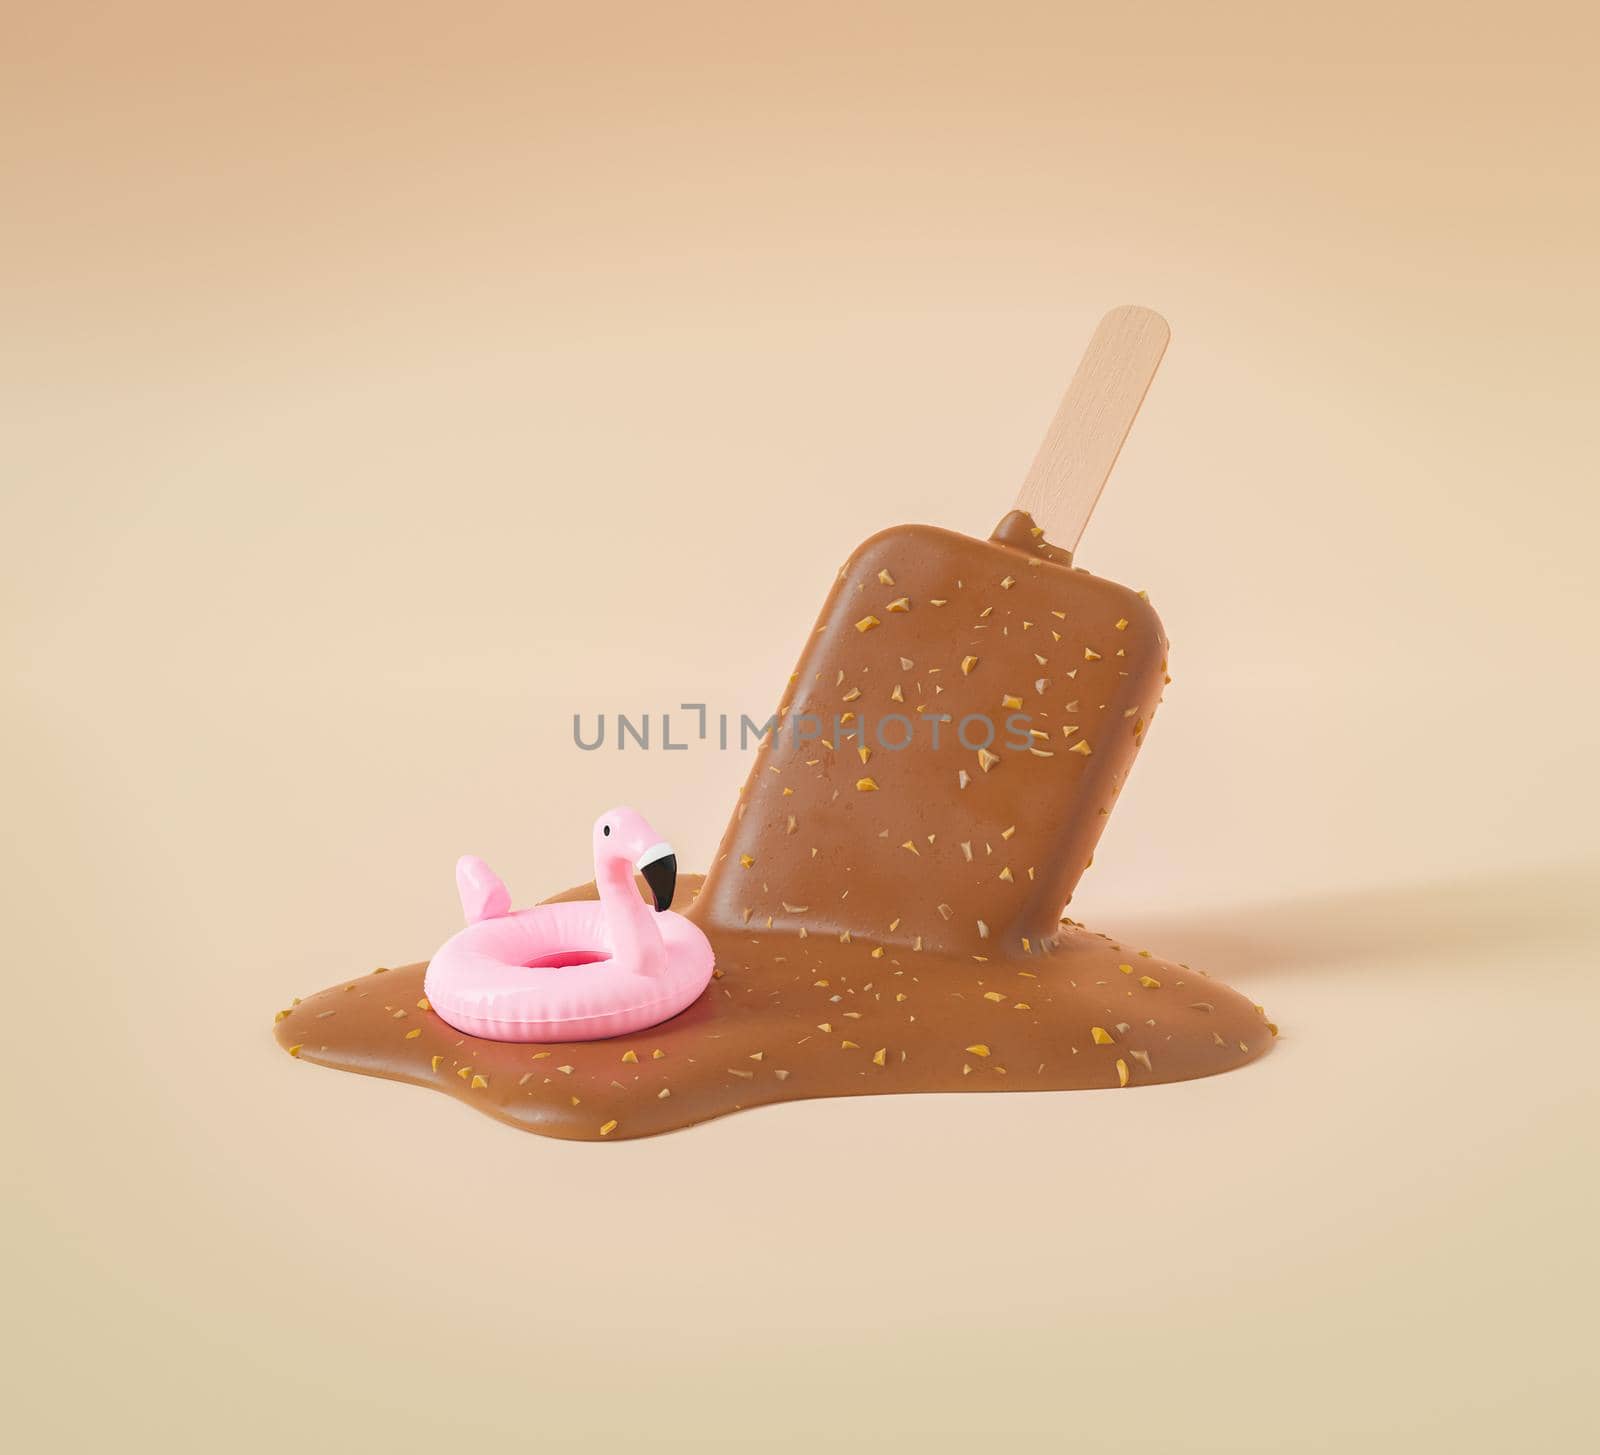 Melted chocolate ice cream on stick with miniature inflatable flamingo by asolano